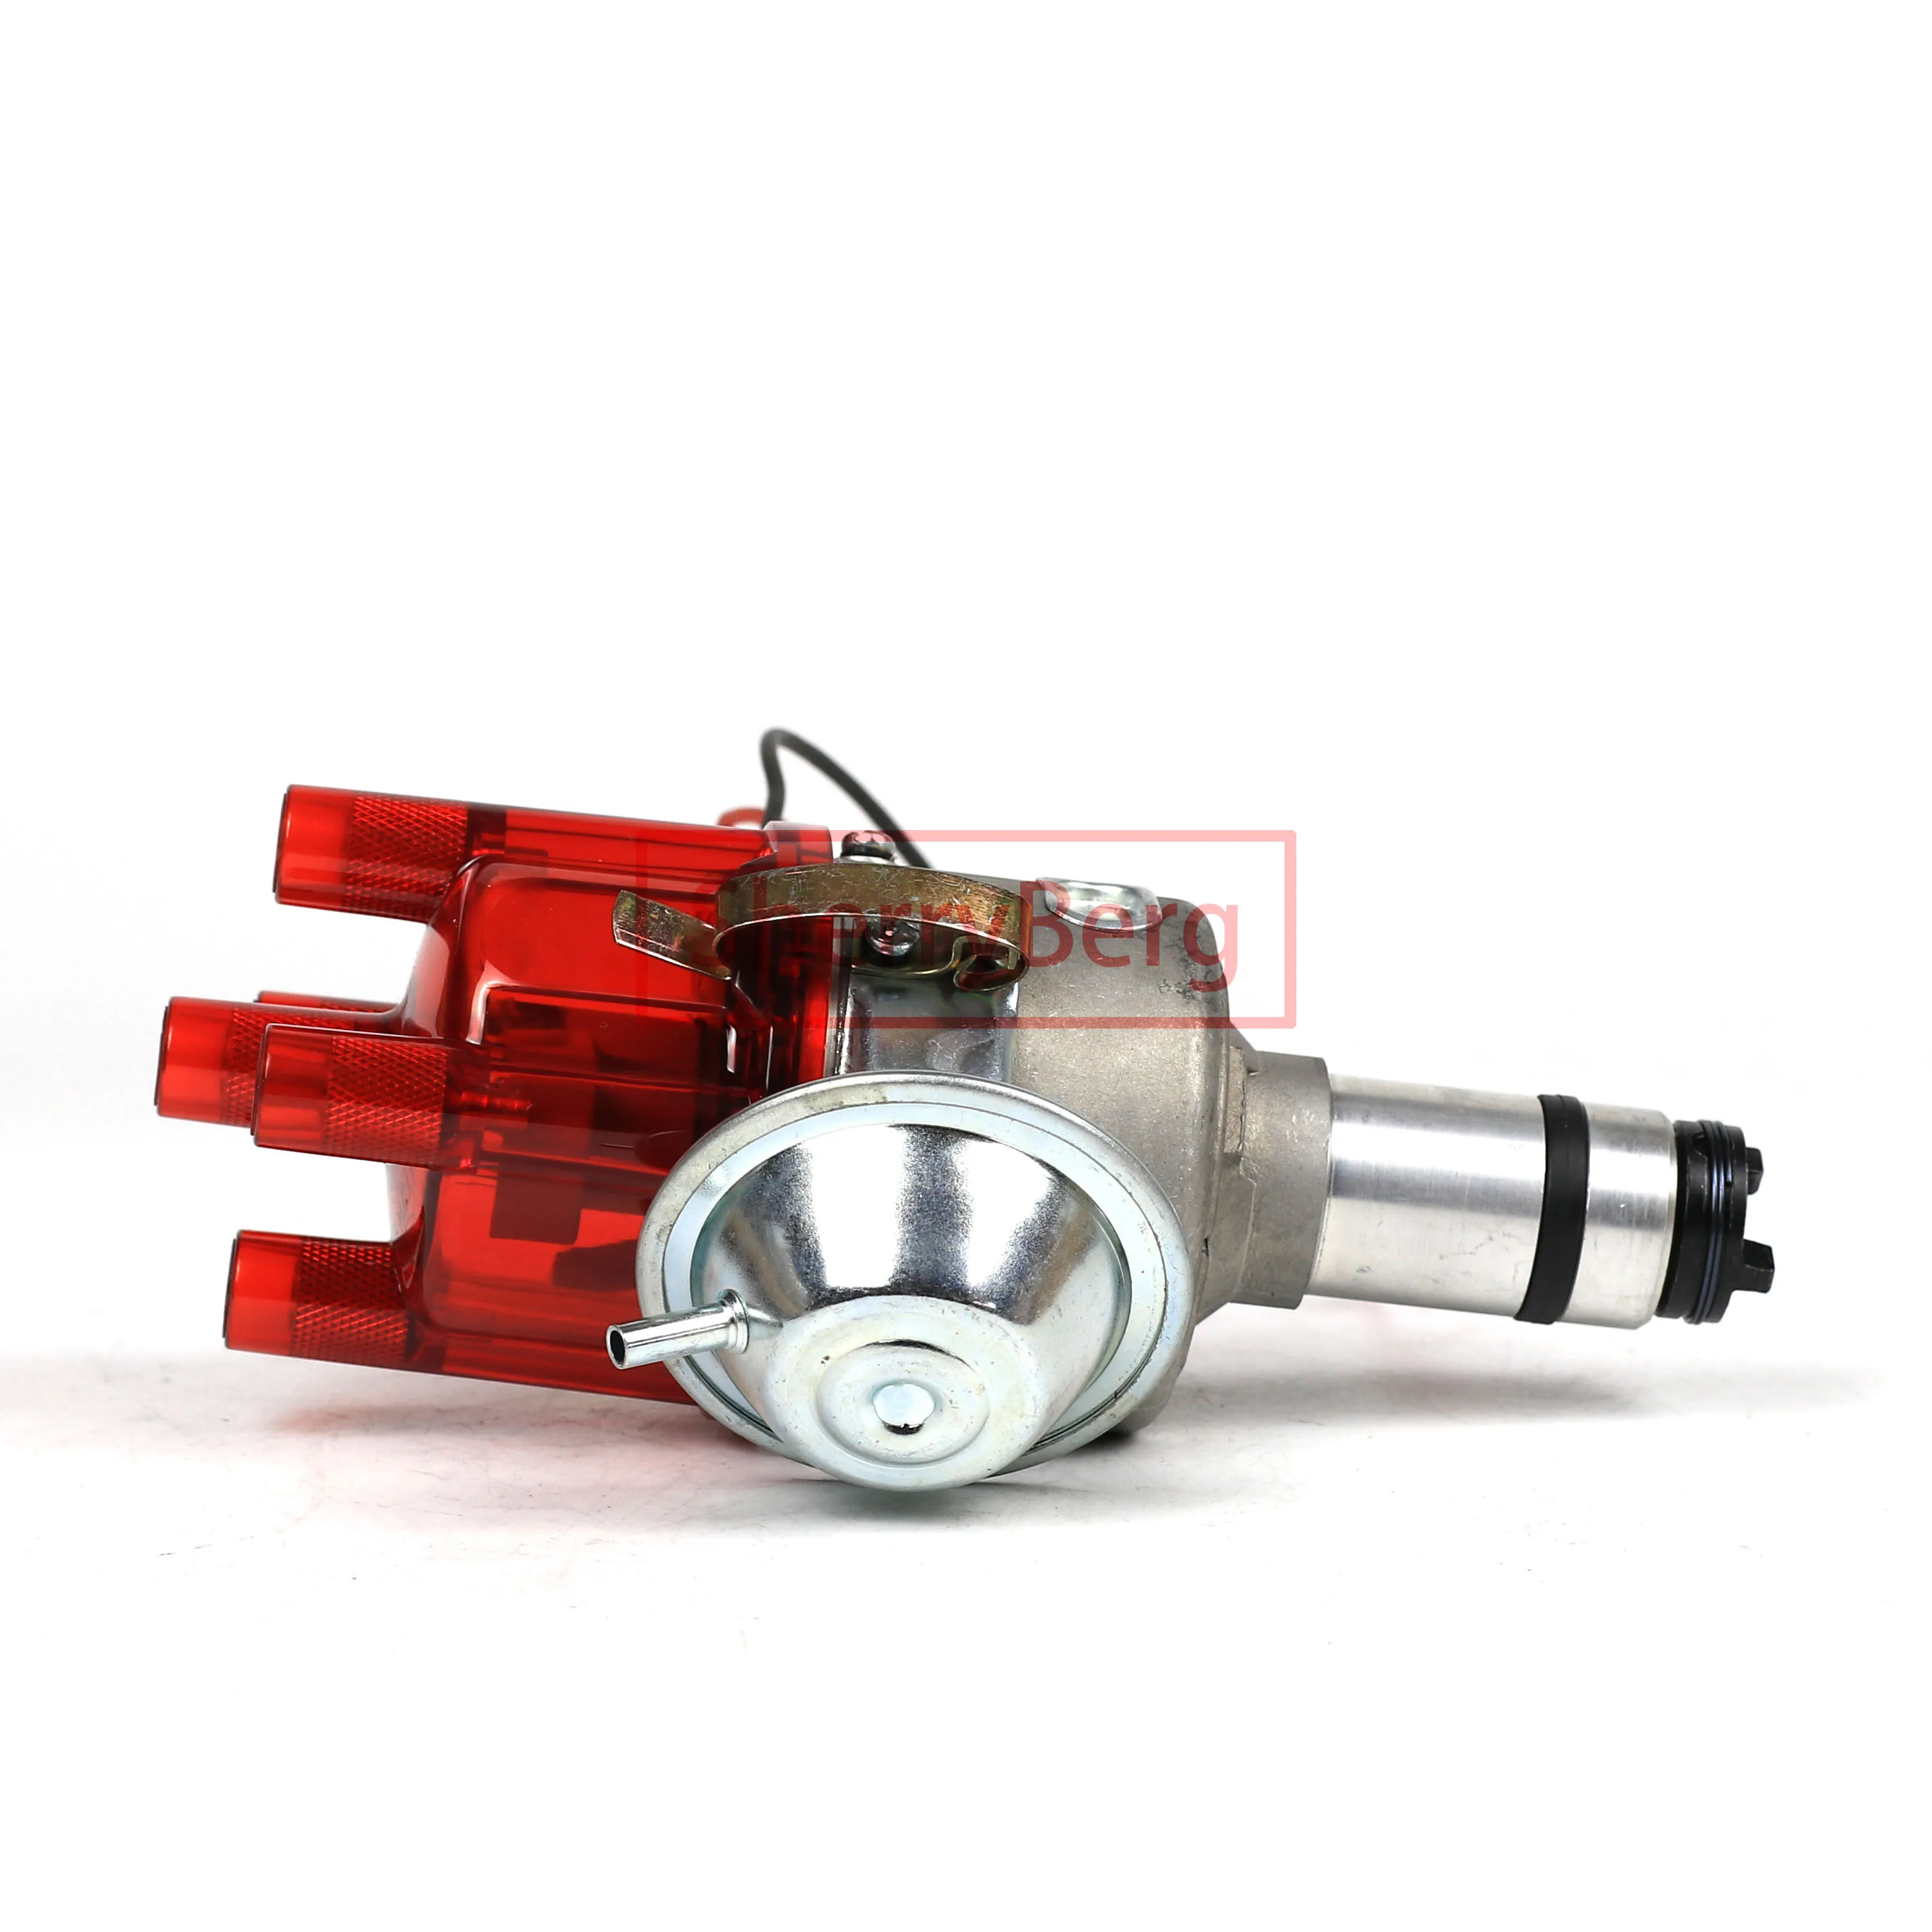 

SherryBerg Complete electronic ignition distributor for VOLVO B20A B20B B18 engines VACUUM ADVANCE CCW red transparency cap